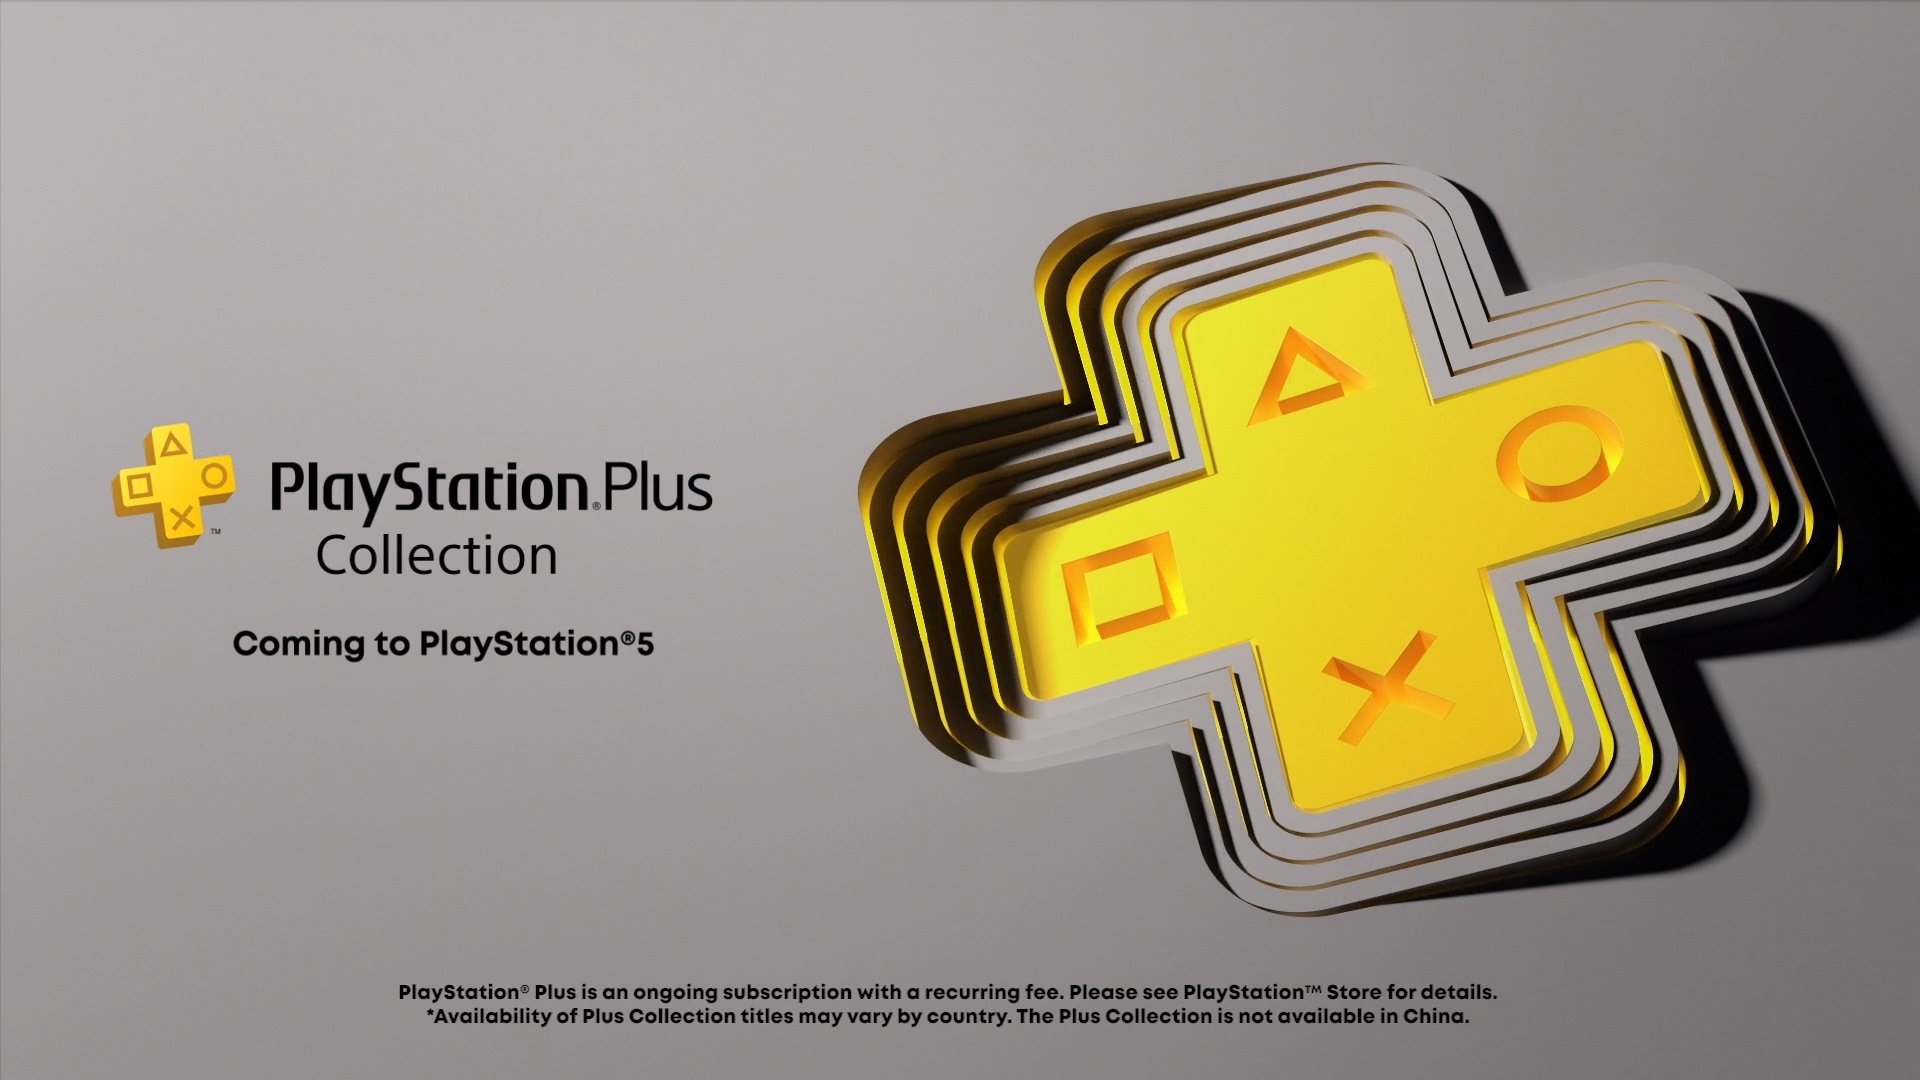 PlayStation Plus subscribers can play a gorgeous open-world PS5